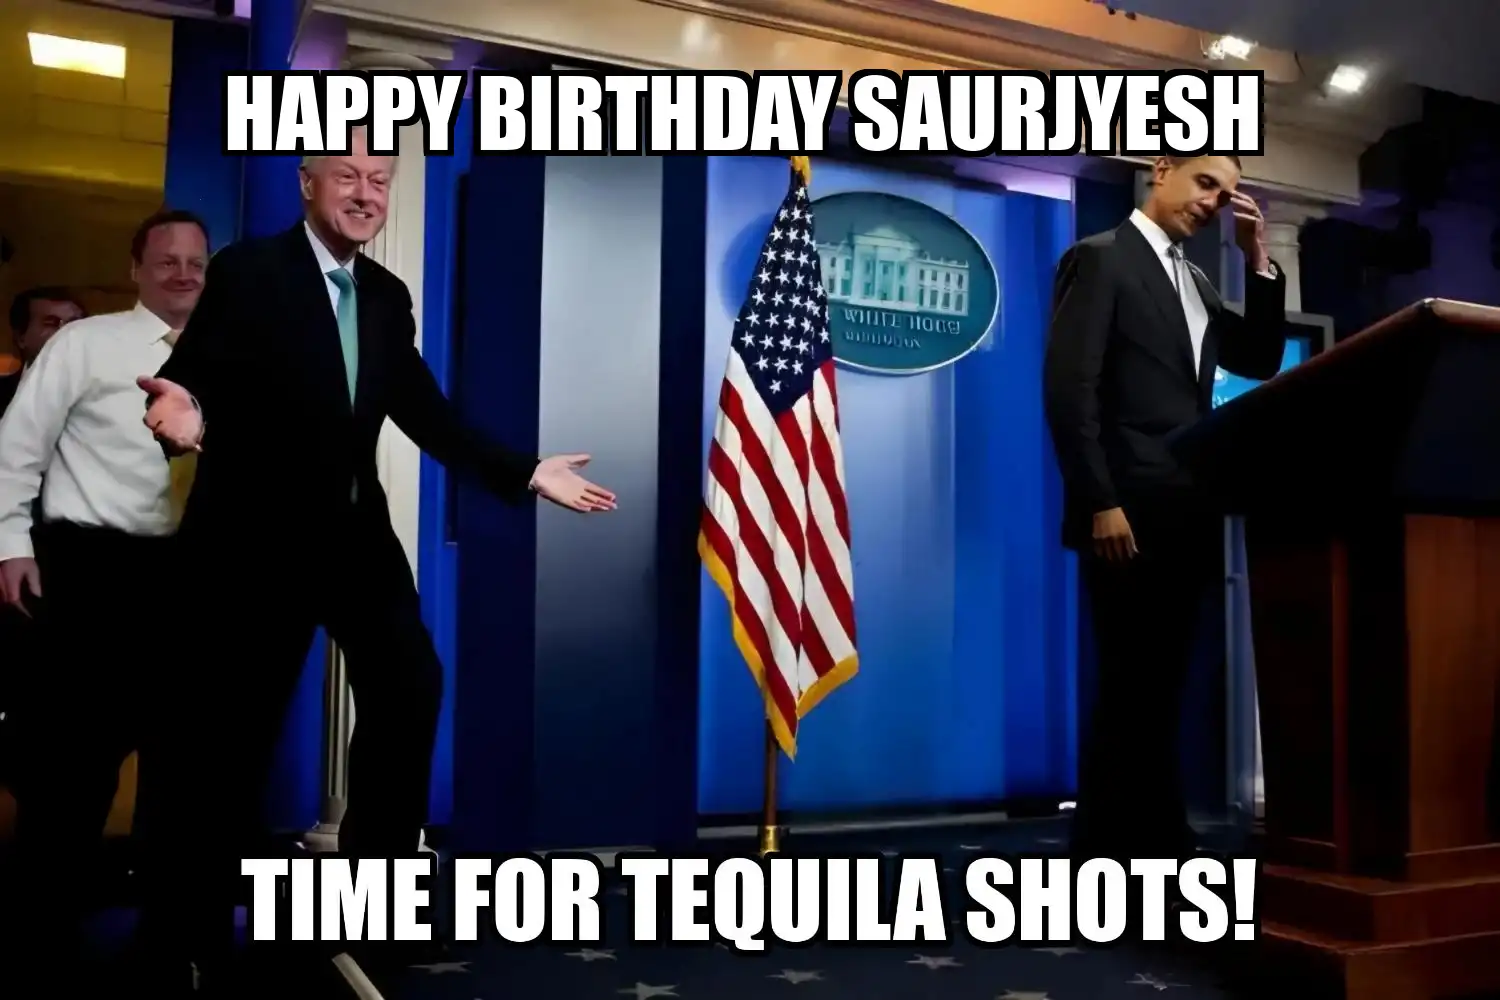 Happy Birthday Saurjyesh Time For Tequila Shots Memes